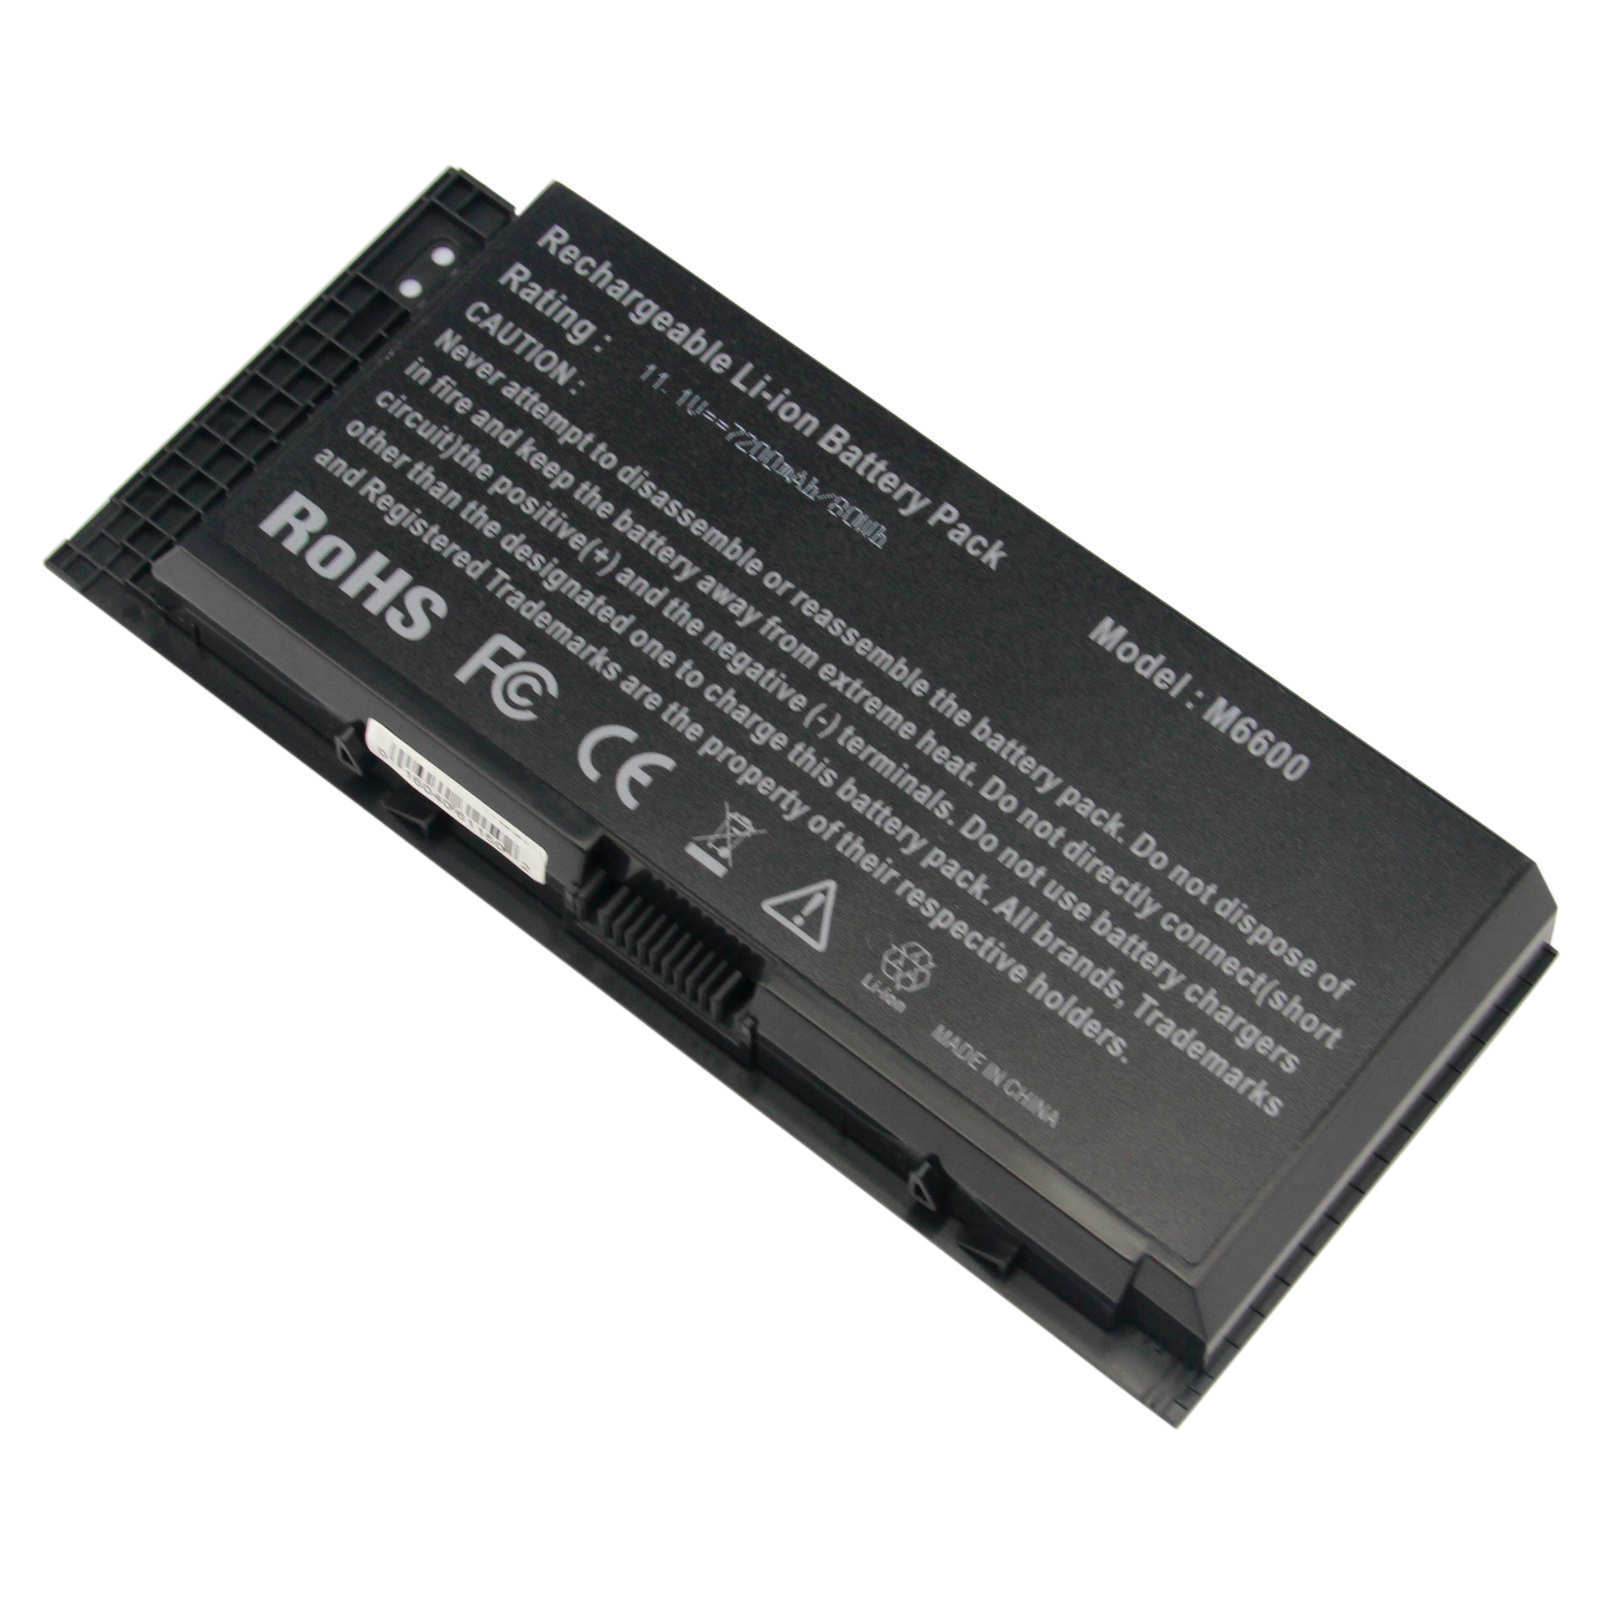 Battery / Charger for Dell  Precision m4600 m6600 fv993 7dwmt jhyp2 312-1176